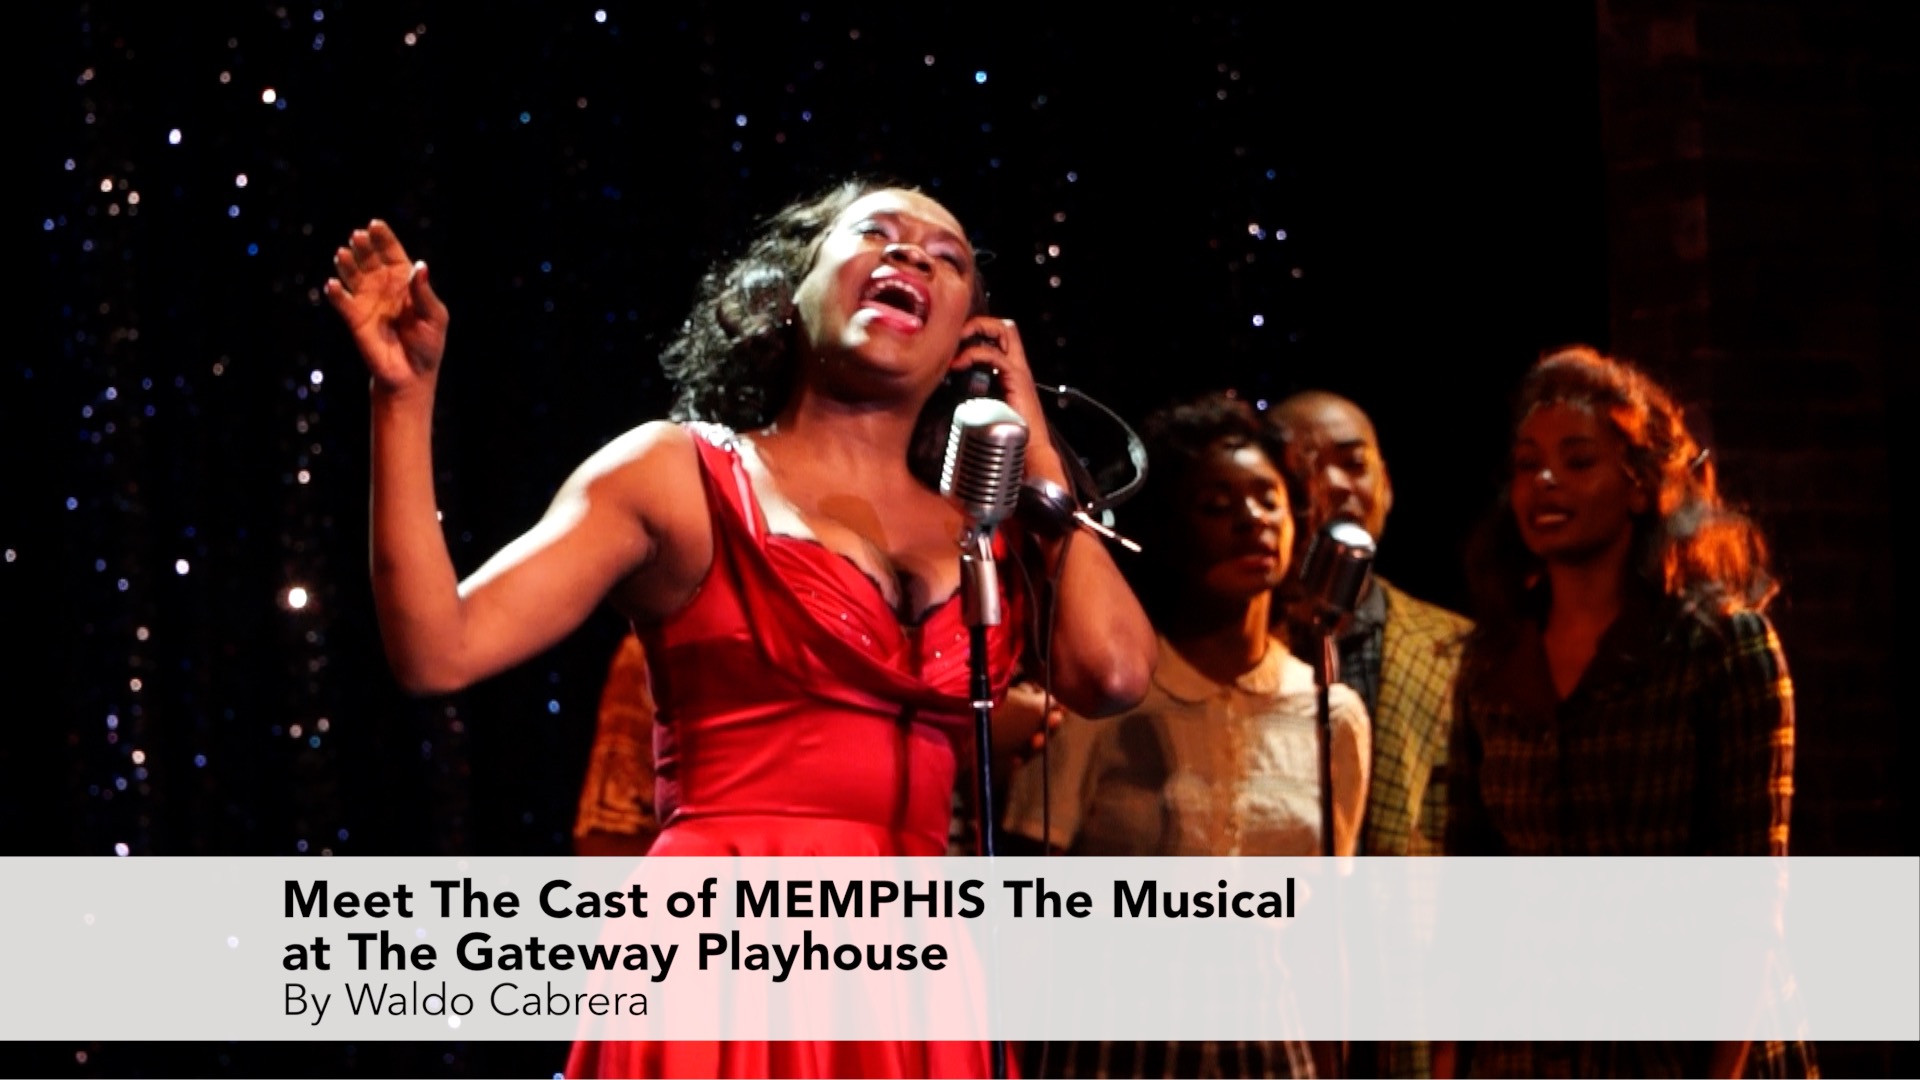 Meet The Cast of Memphis at the Gateway Playhouse